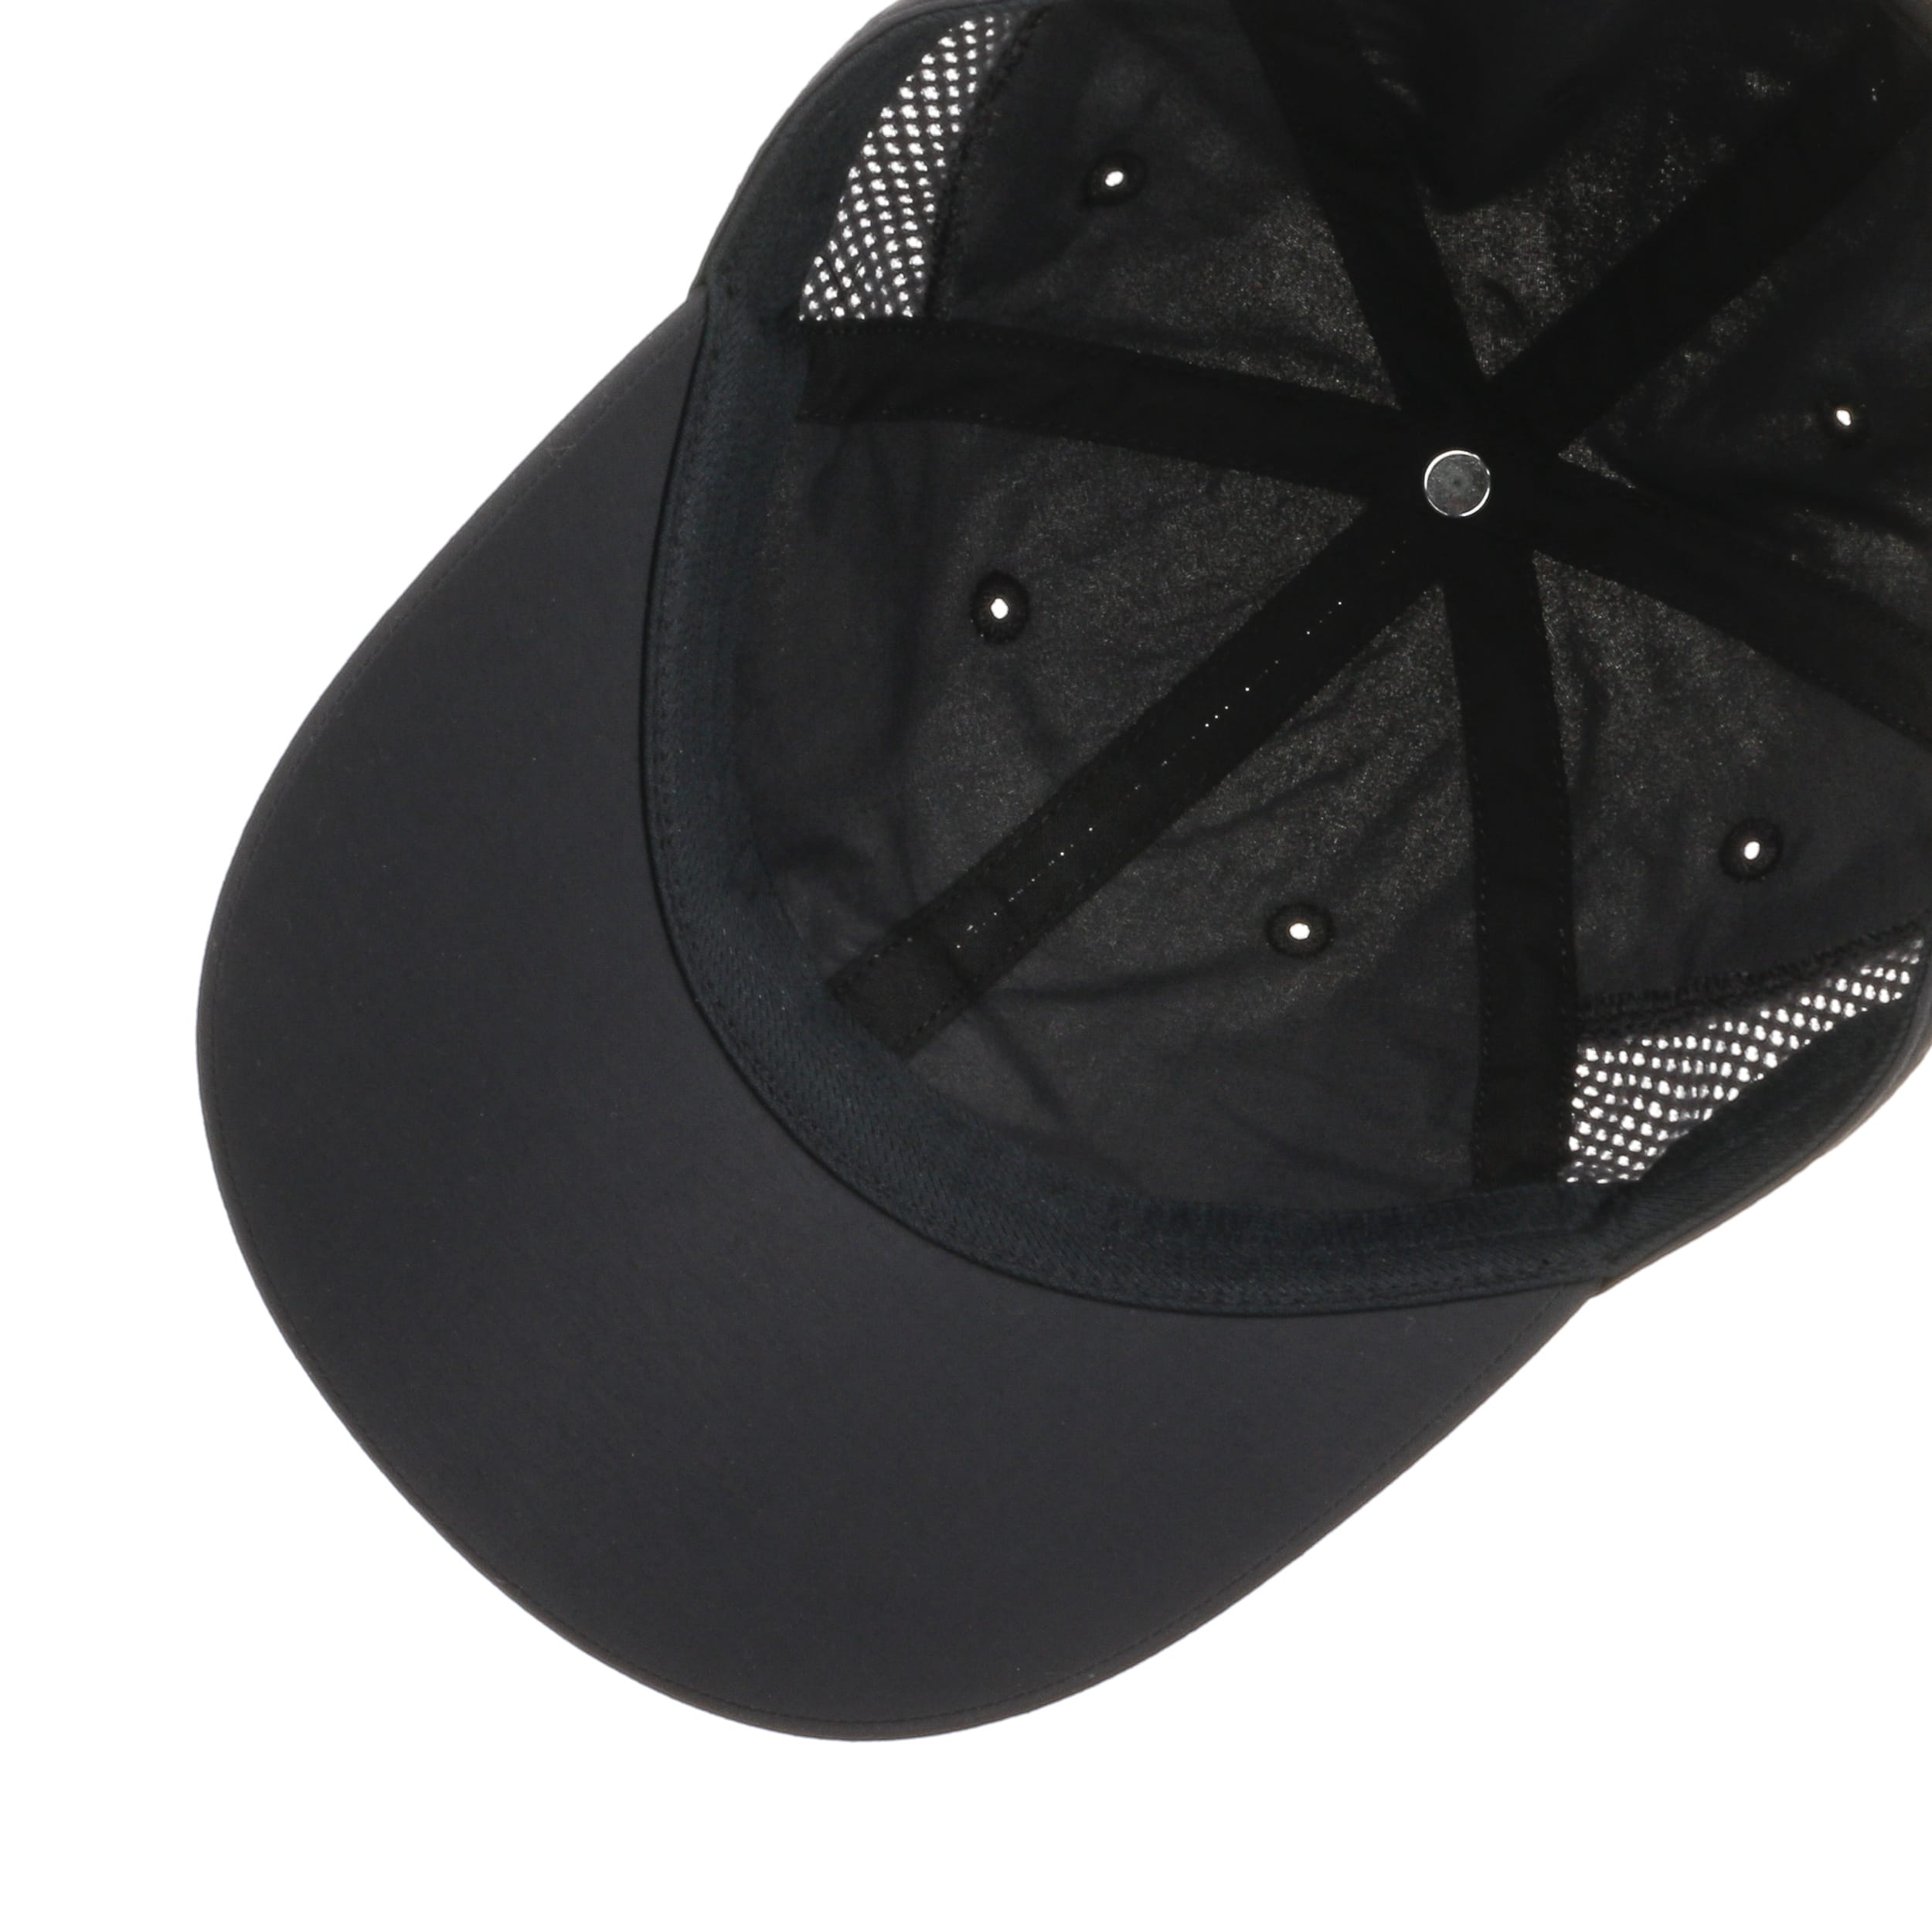 Tech Shade Strapback Cap by Columbia